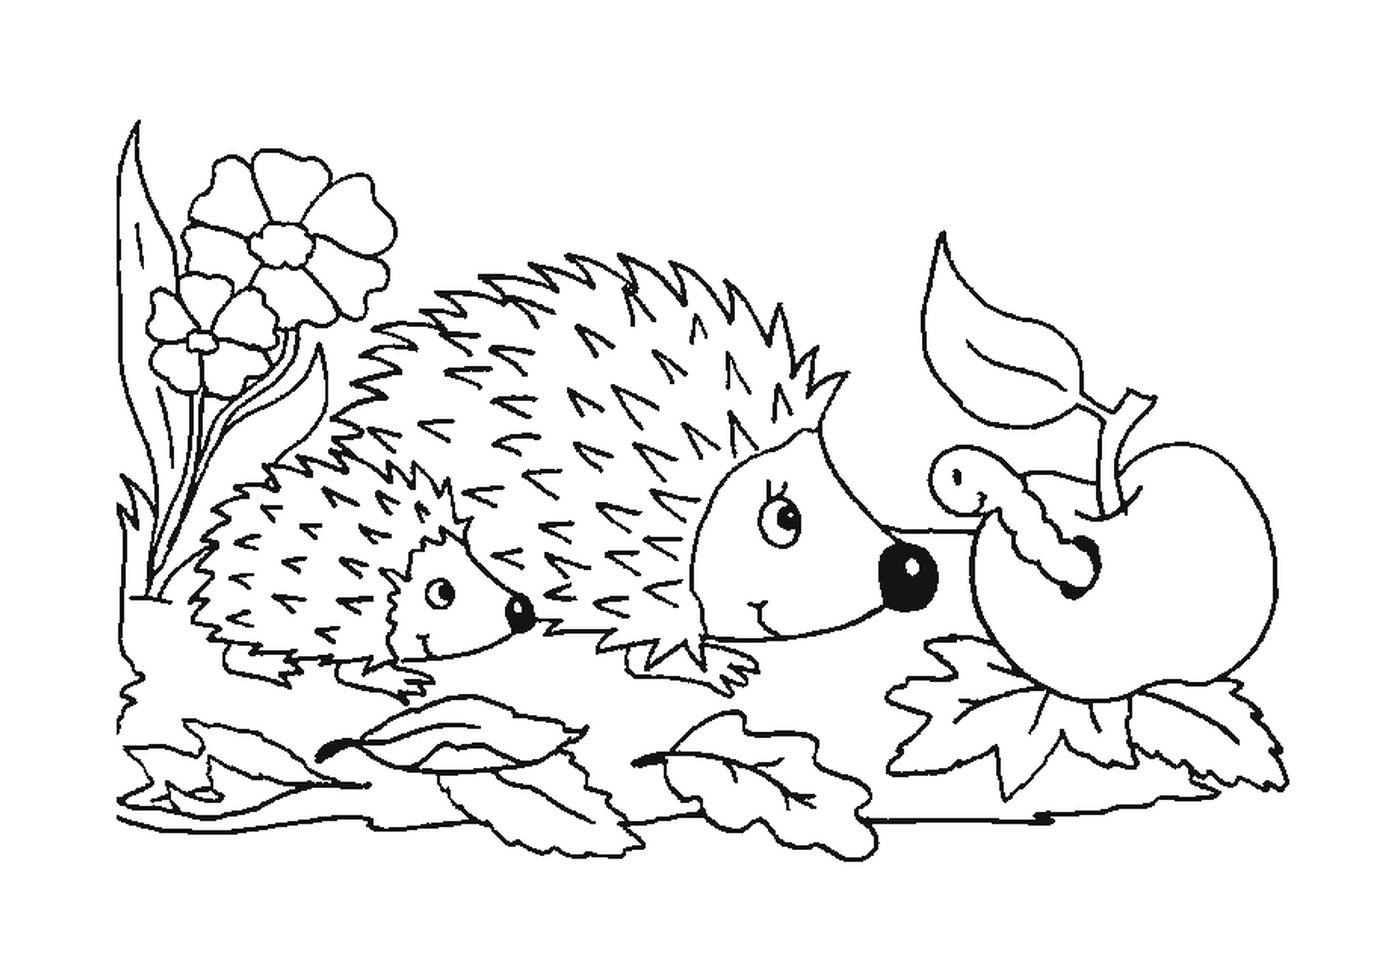  Flowers, two hedgehogs and an apple 